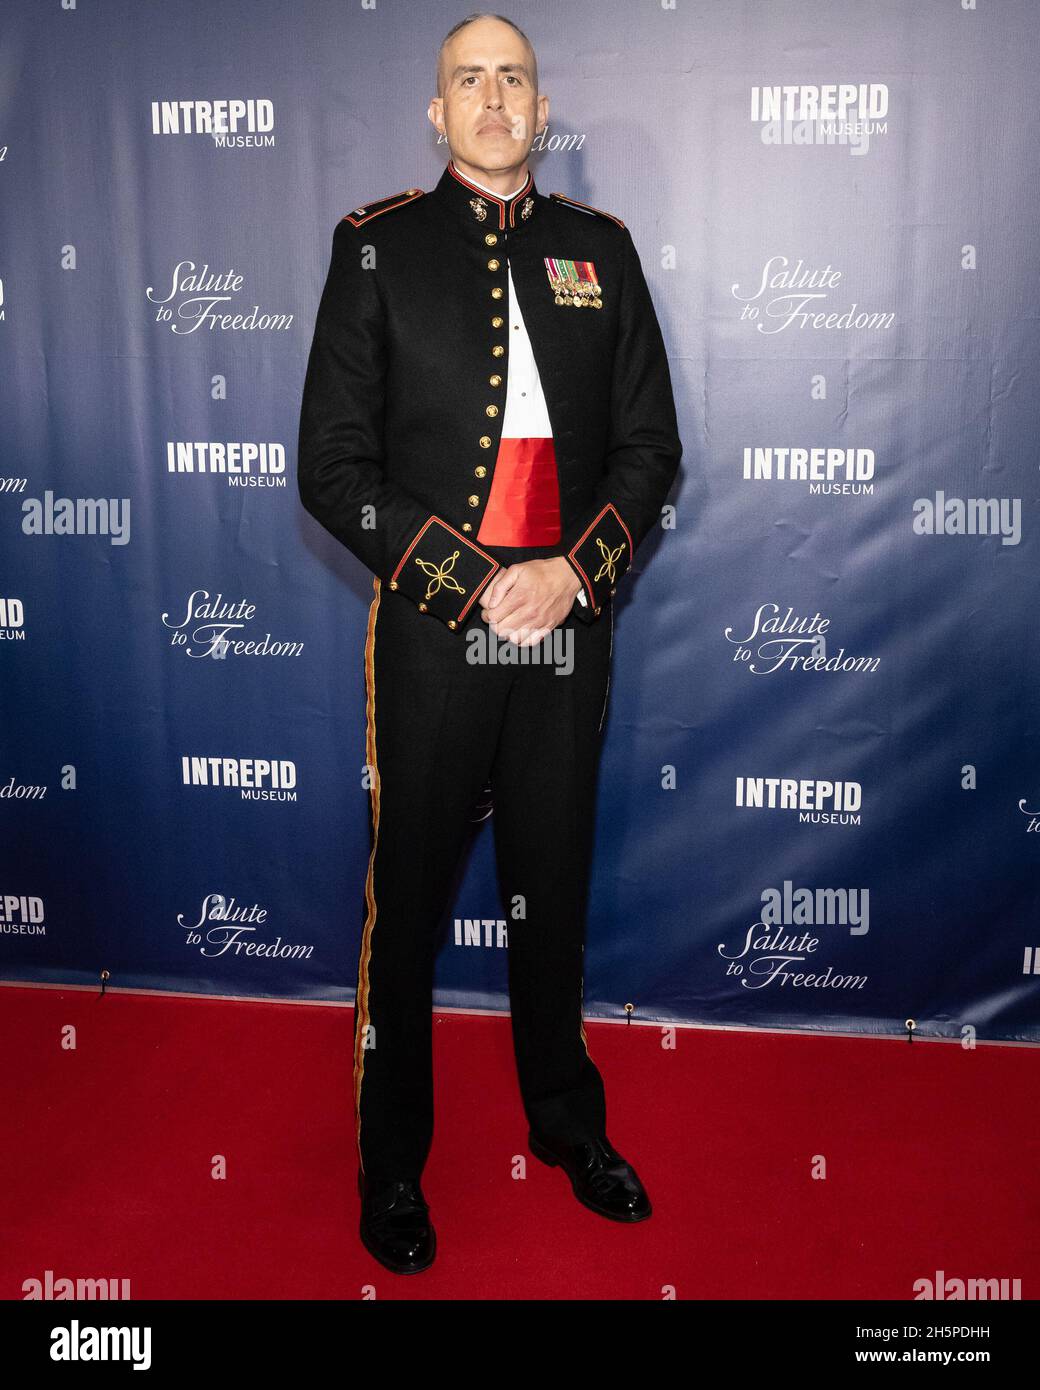 New York, USA. 10th Nov, 2021. Valor Award recipient CWOS Stephen Rudinski attends the Salute to Freedom Gala at the Intrepid Sea, Air & Space Museum in New York, New York, on Nov. 10, 2021. (Photo by Gabriele Holtermann/Sipa USA) Credit: Sipa USA/Alamy Live News Stock Photo